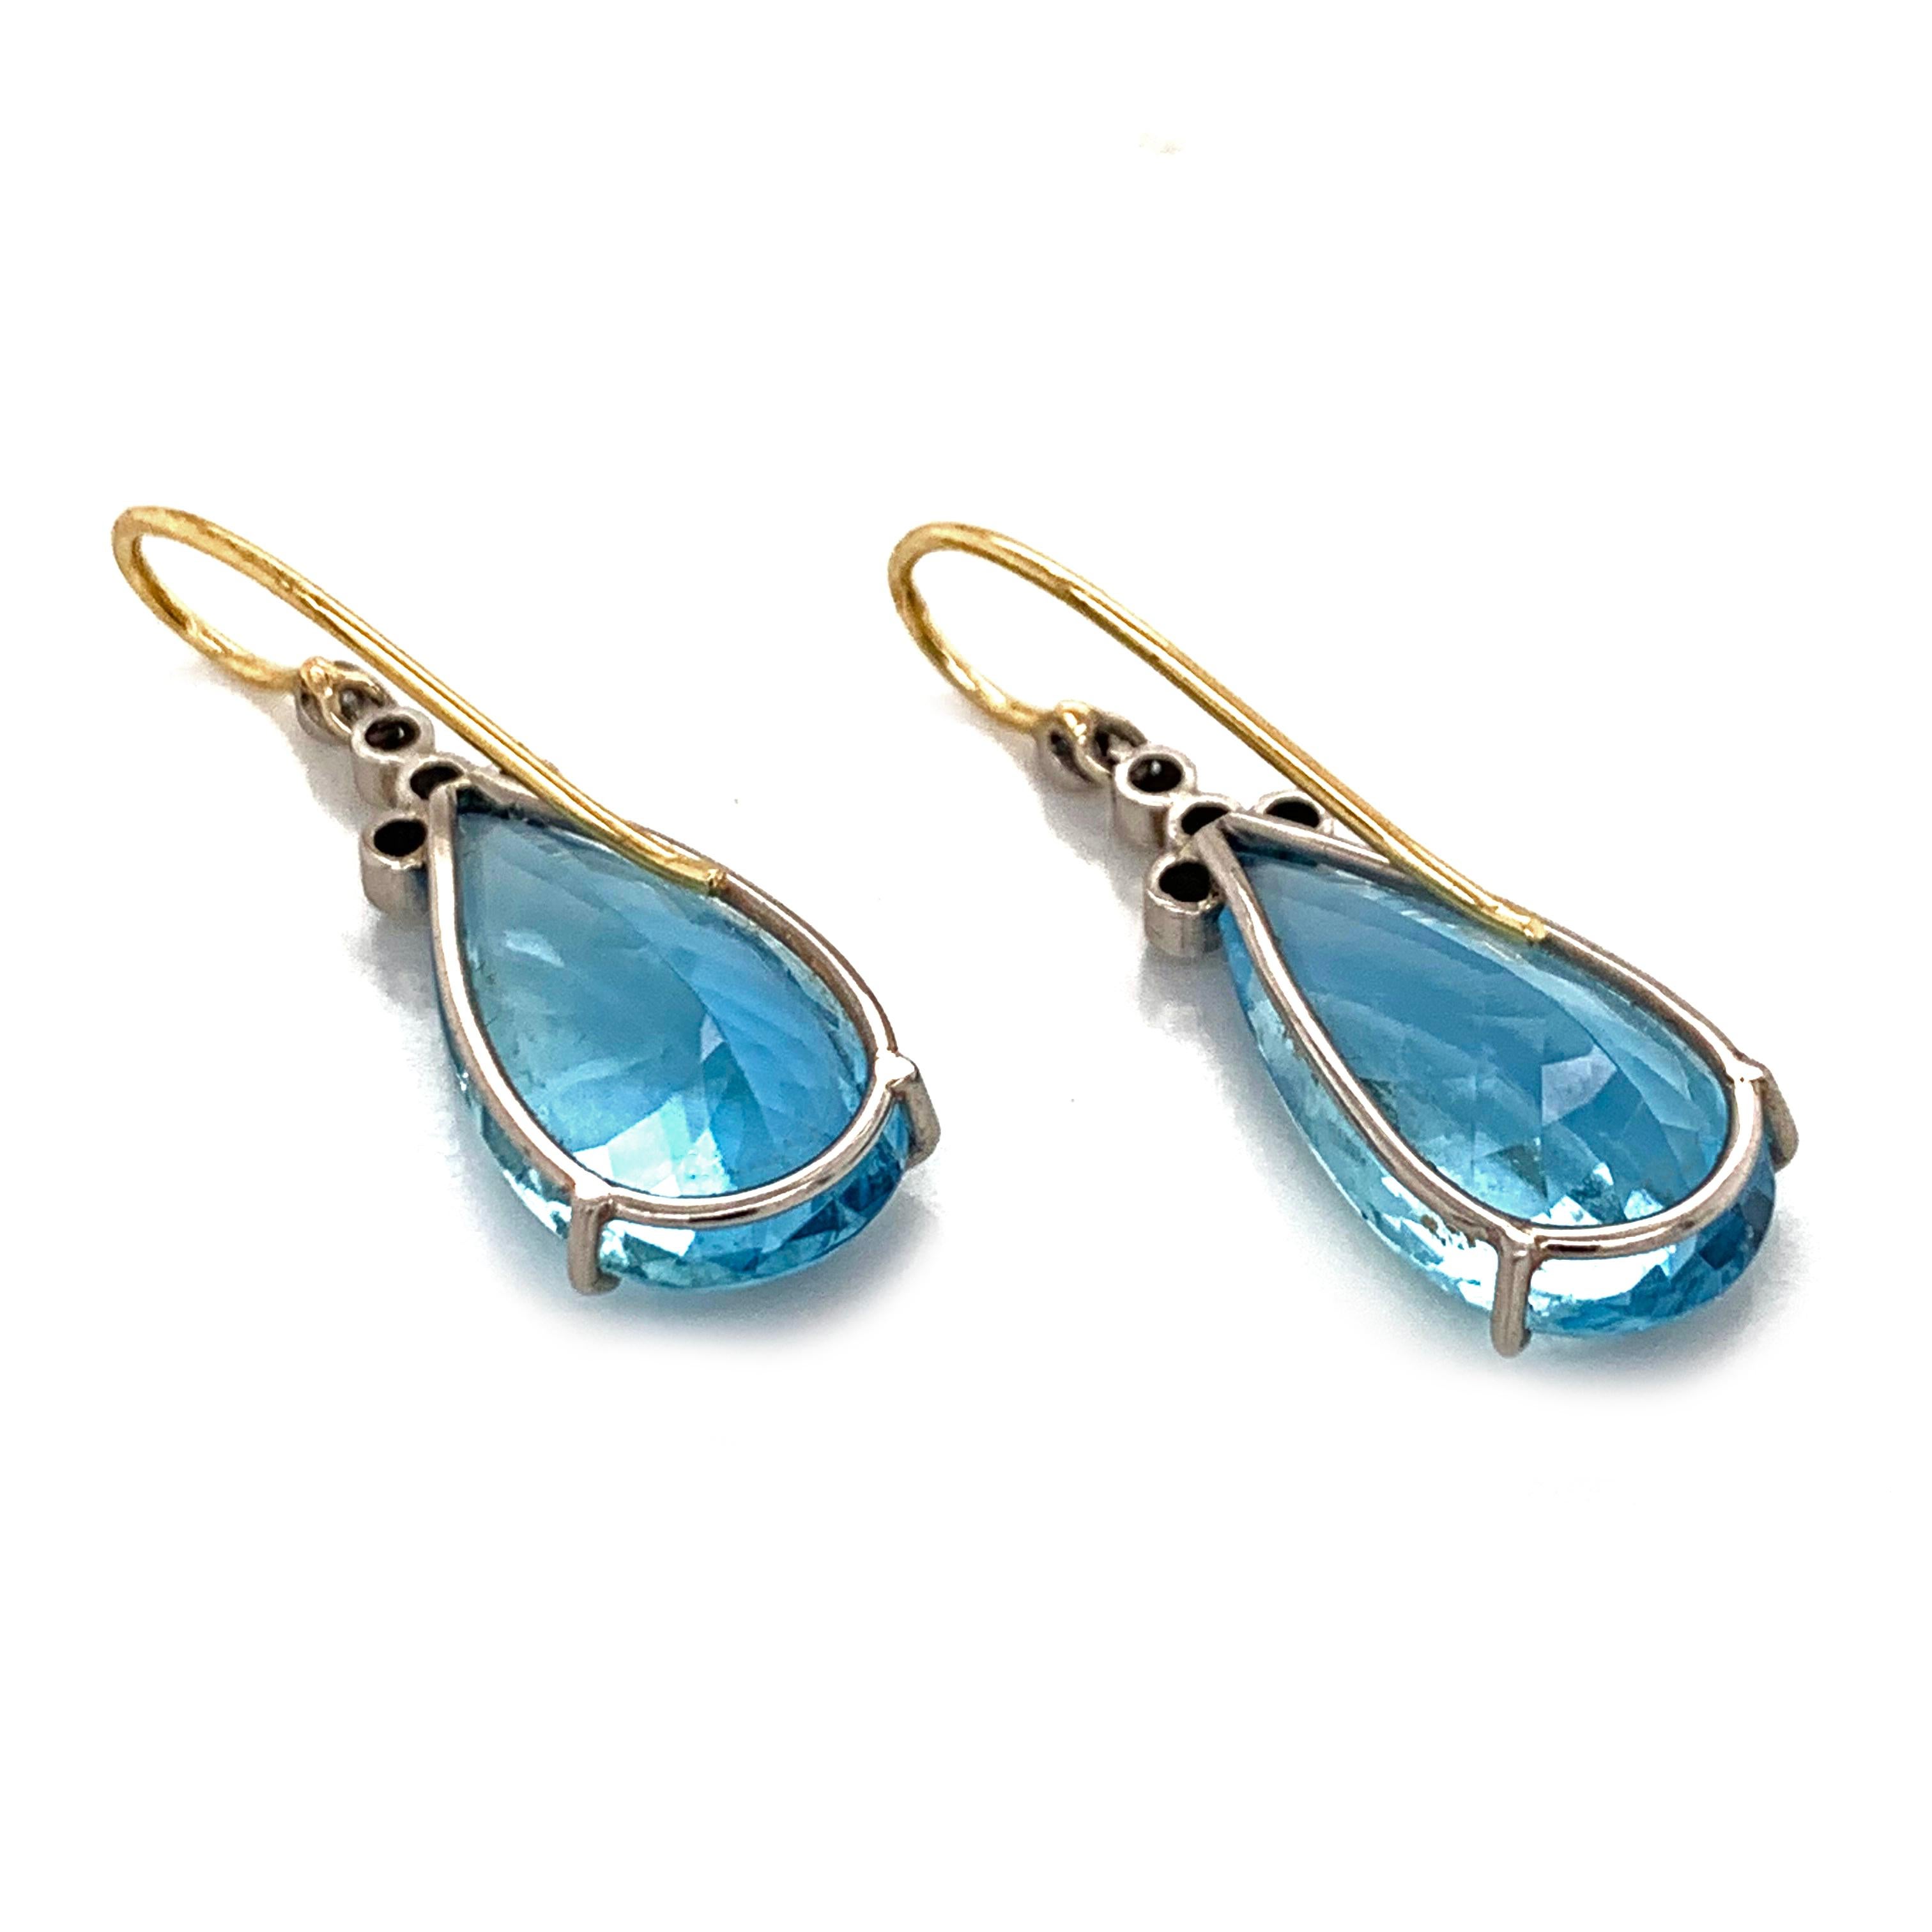 A, pair of beautiful dangle drop Aquamarine earrings. Beautifully,crafted in platinum and with a polished yellow gold  clip. With a beautiful faceted tear drop shaped Aquamarine. They are 1.2in 